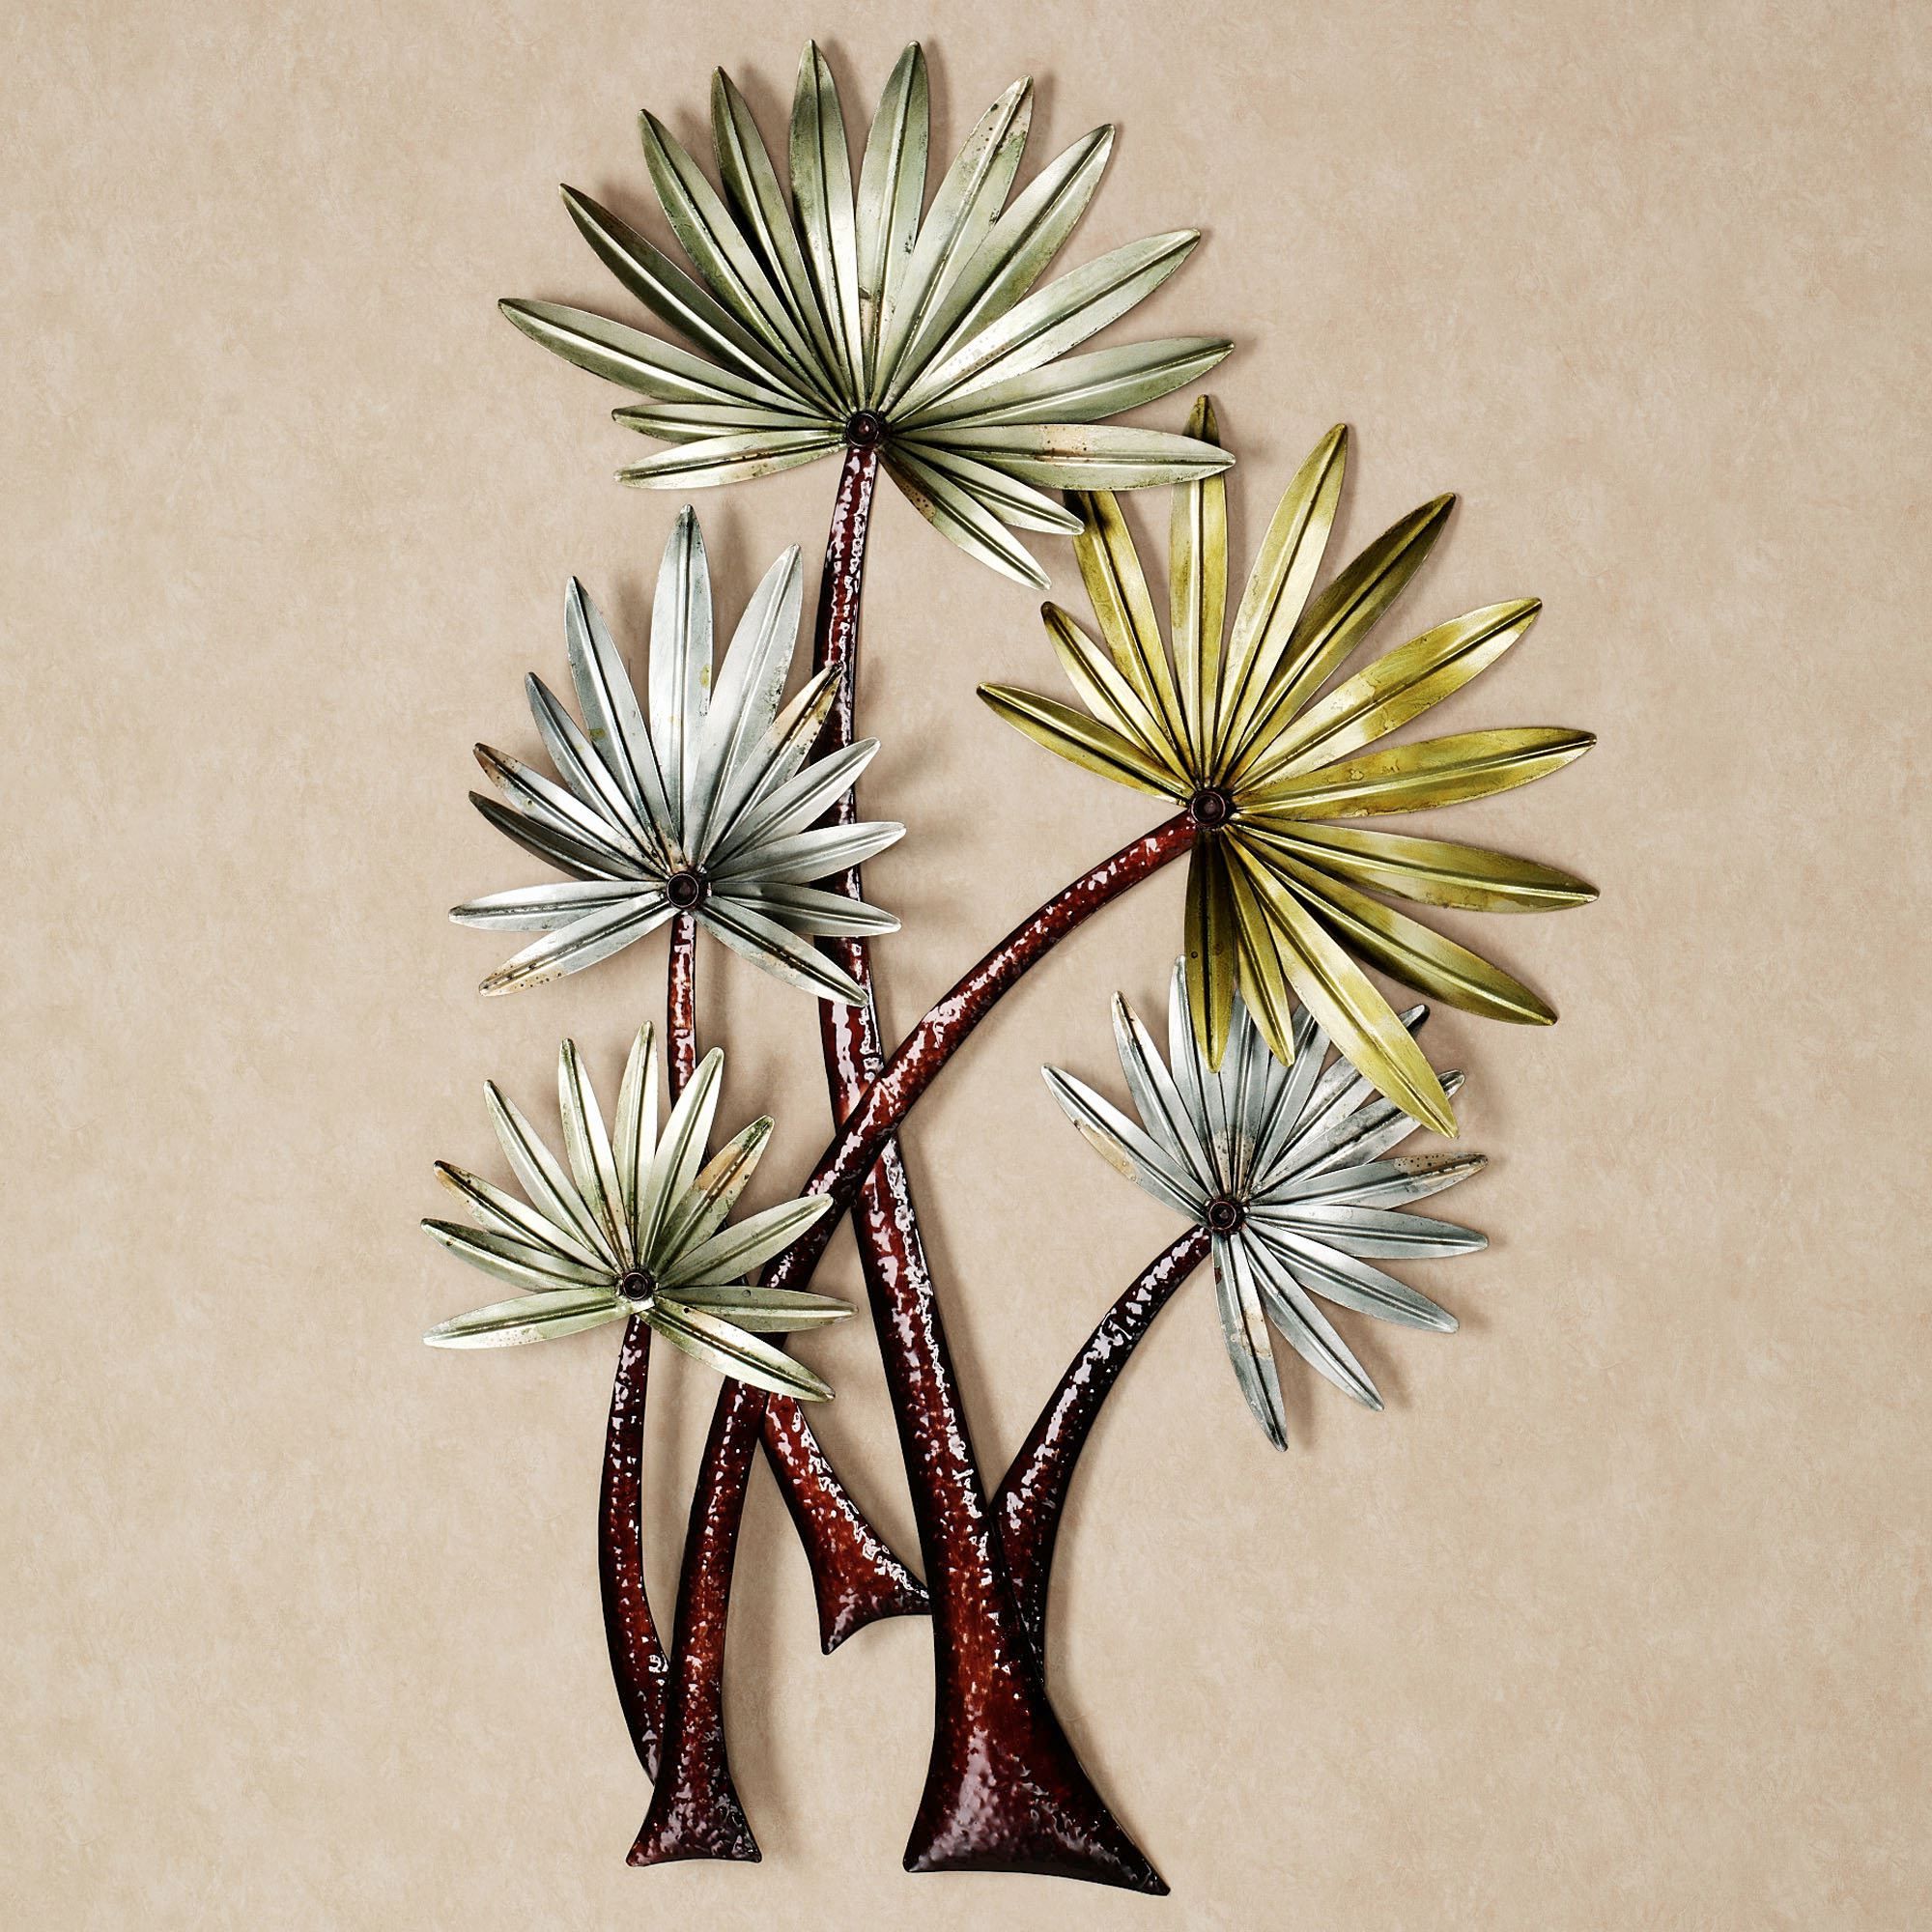 Most Recently Released Sparks Metal Wall Art Intended For Caribbean Retreat Tropical Palm Metal Wall Sculpture (View 6 of 15)